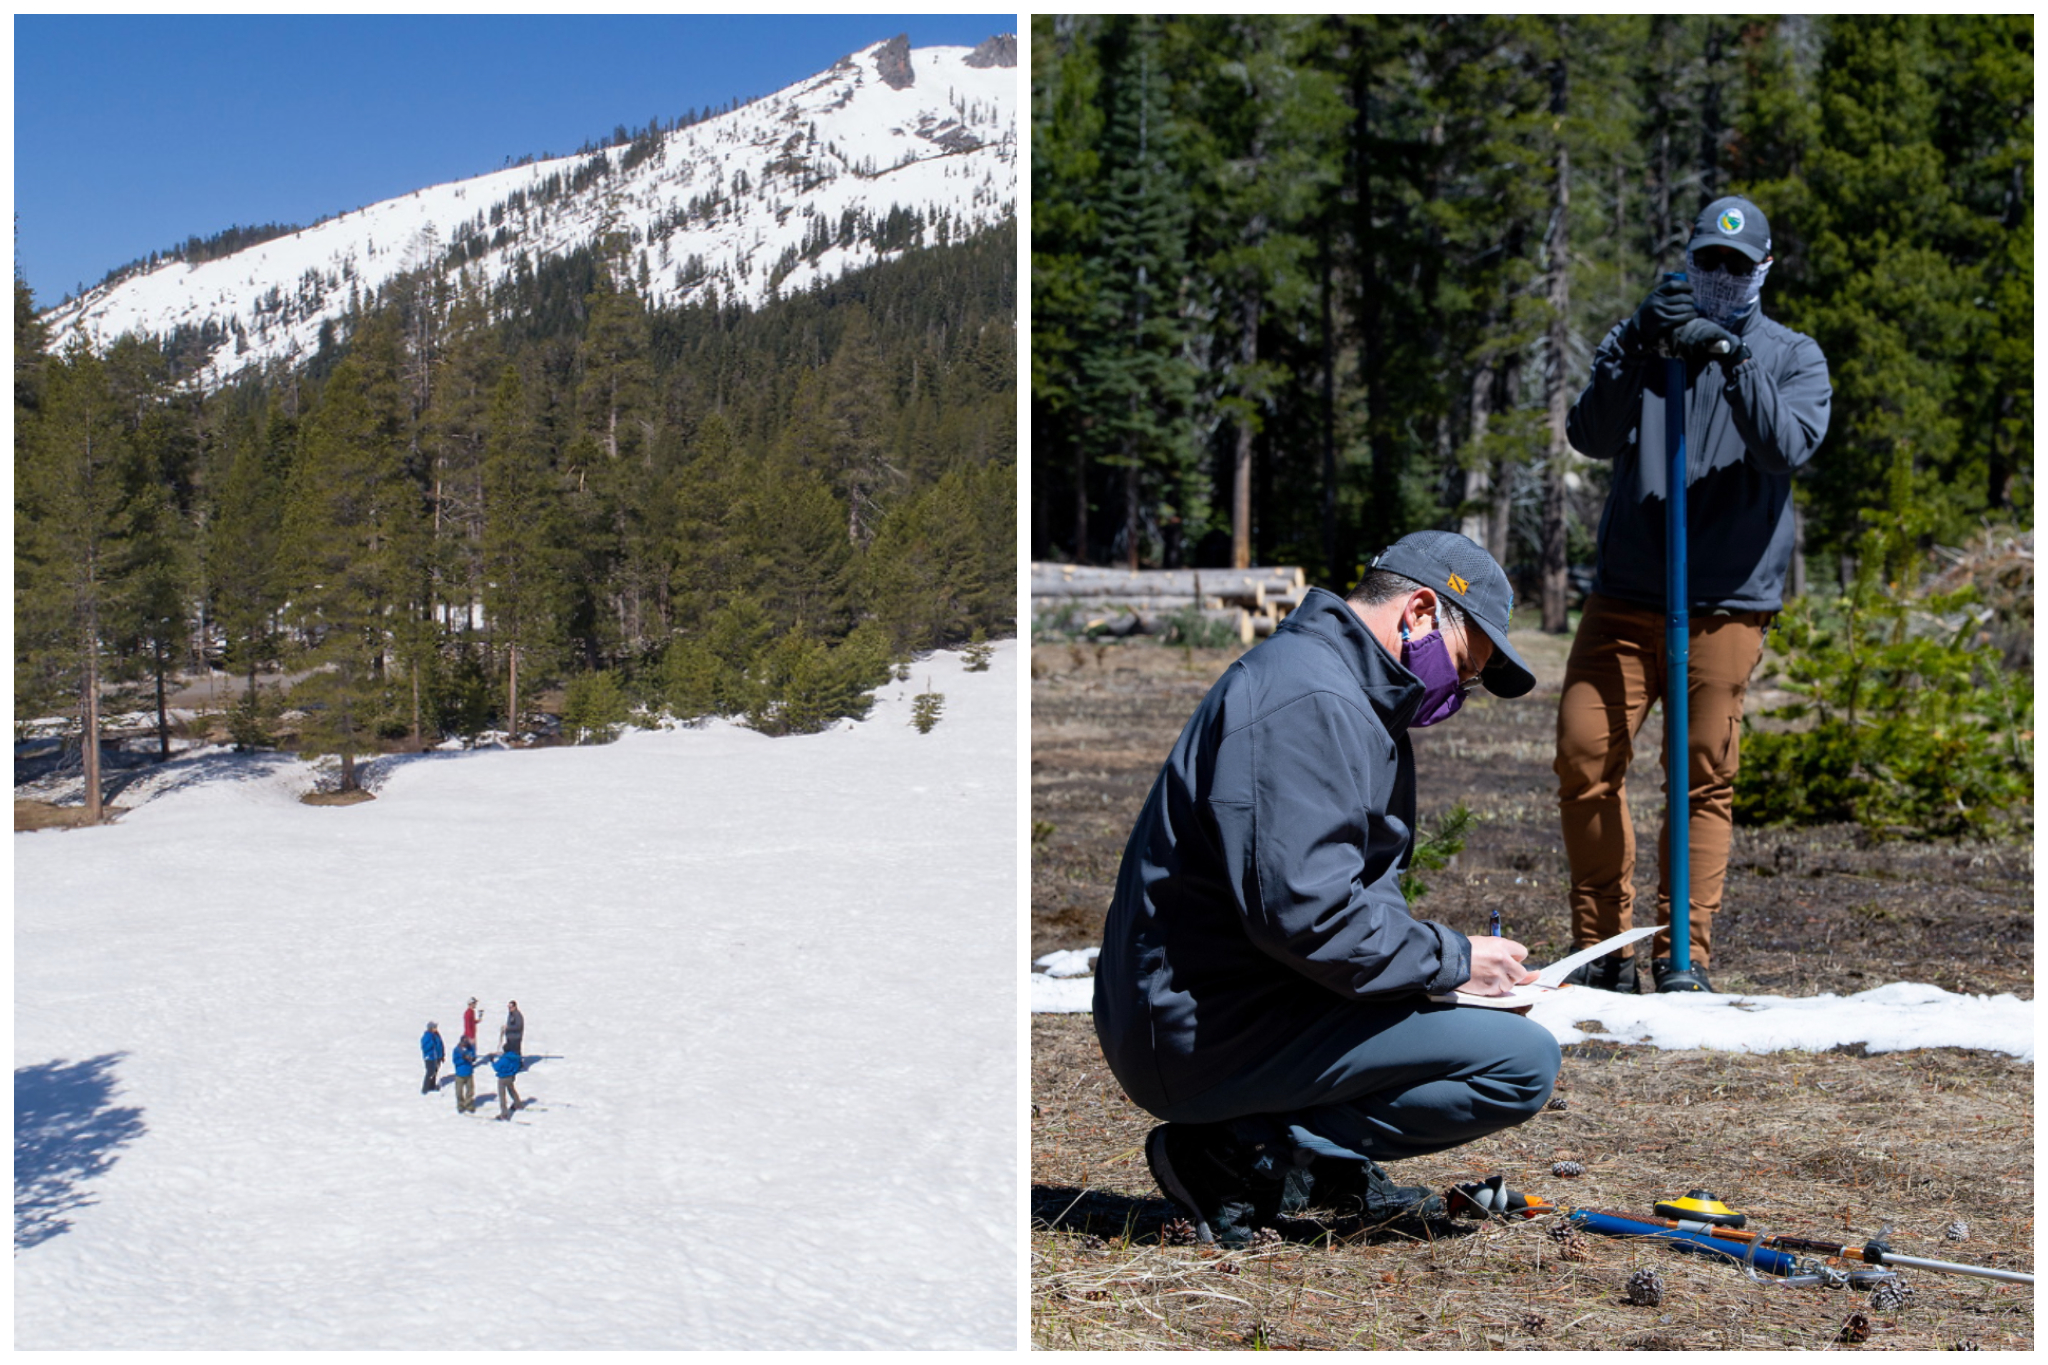 Sierra snow pack is 3% of May average: Here's what that means - SF Gate